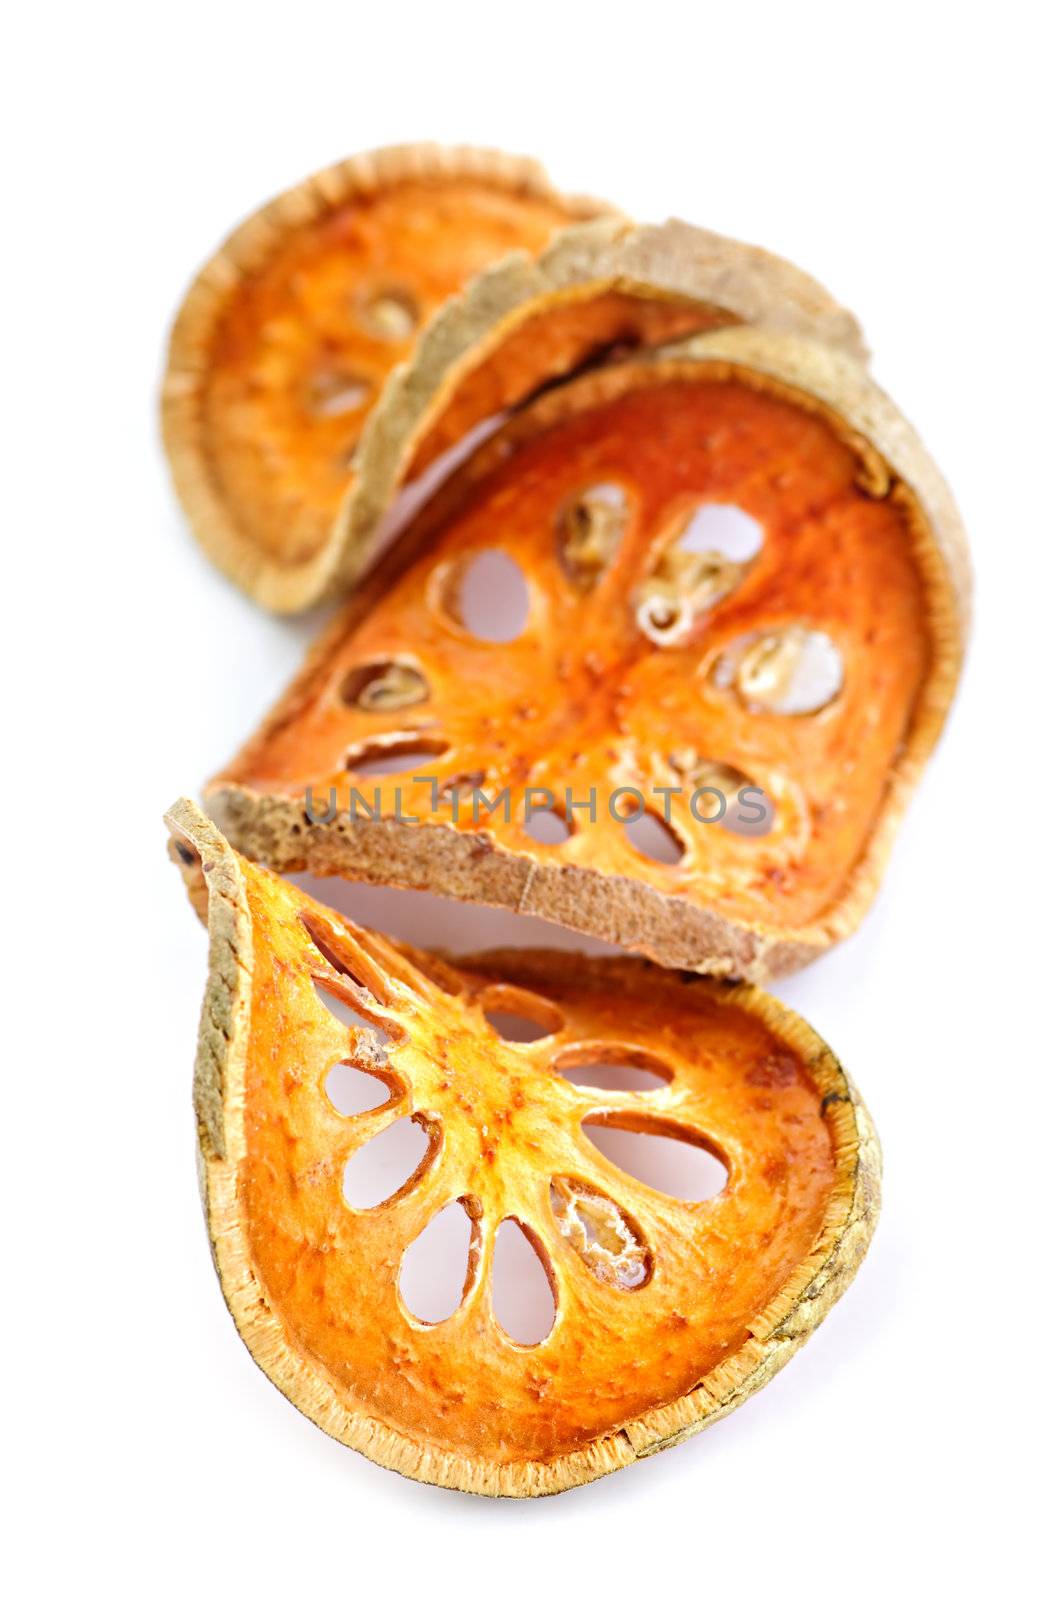 Slices of dried bael fruit on white background